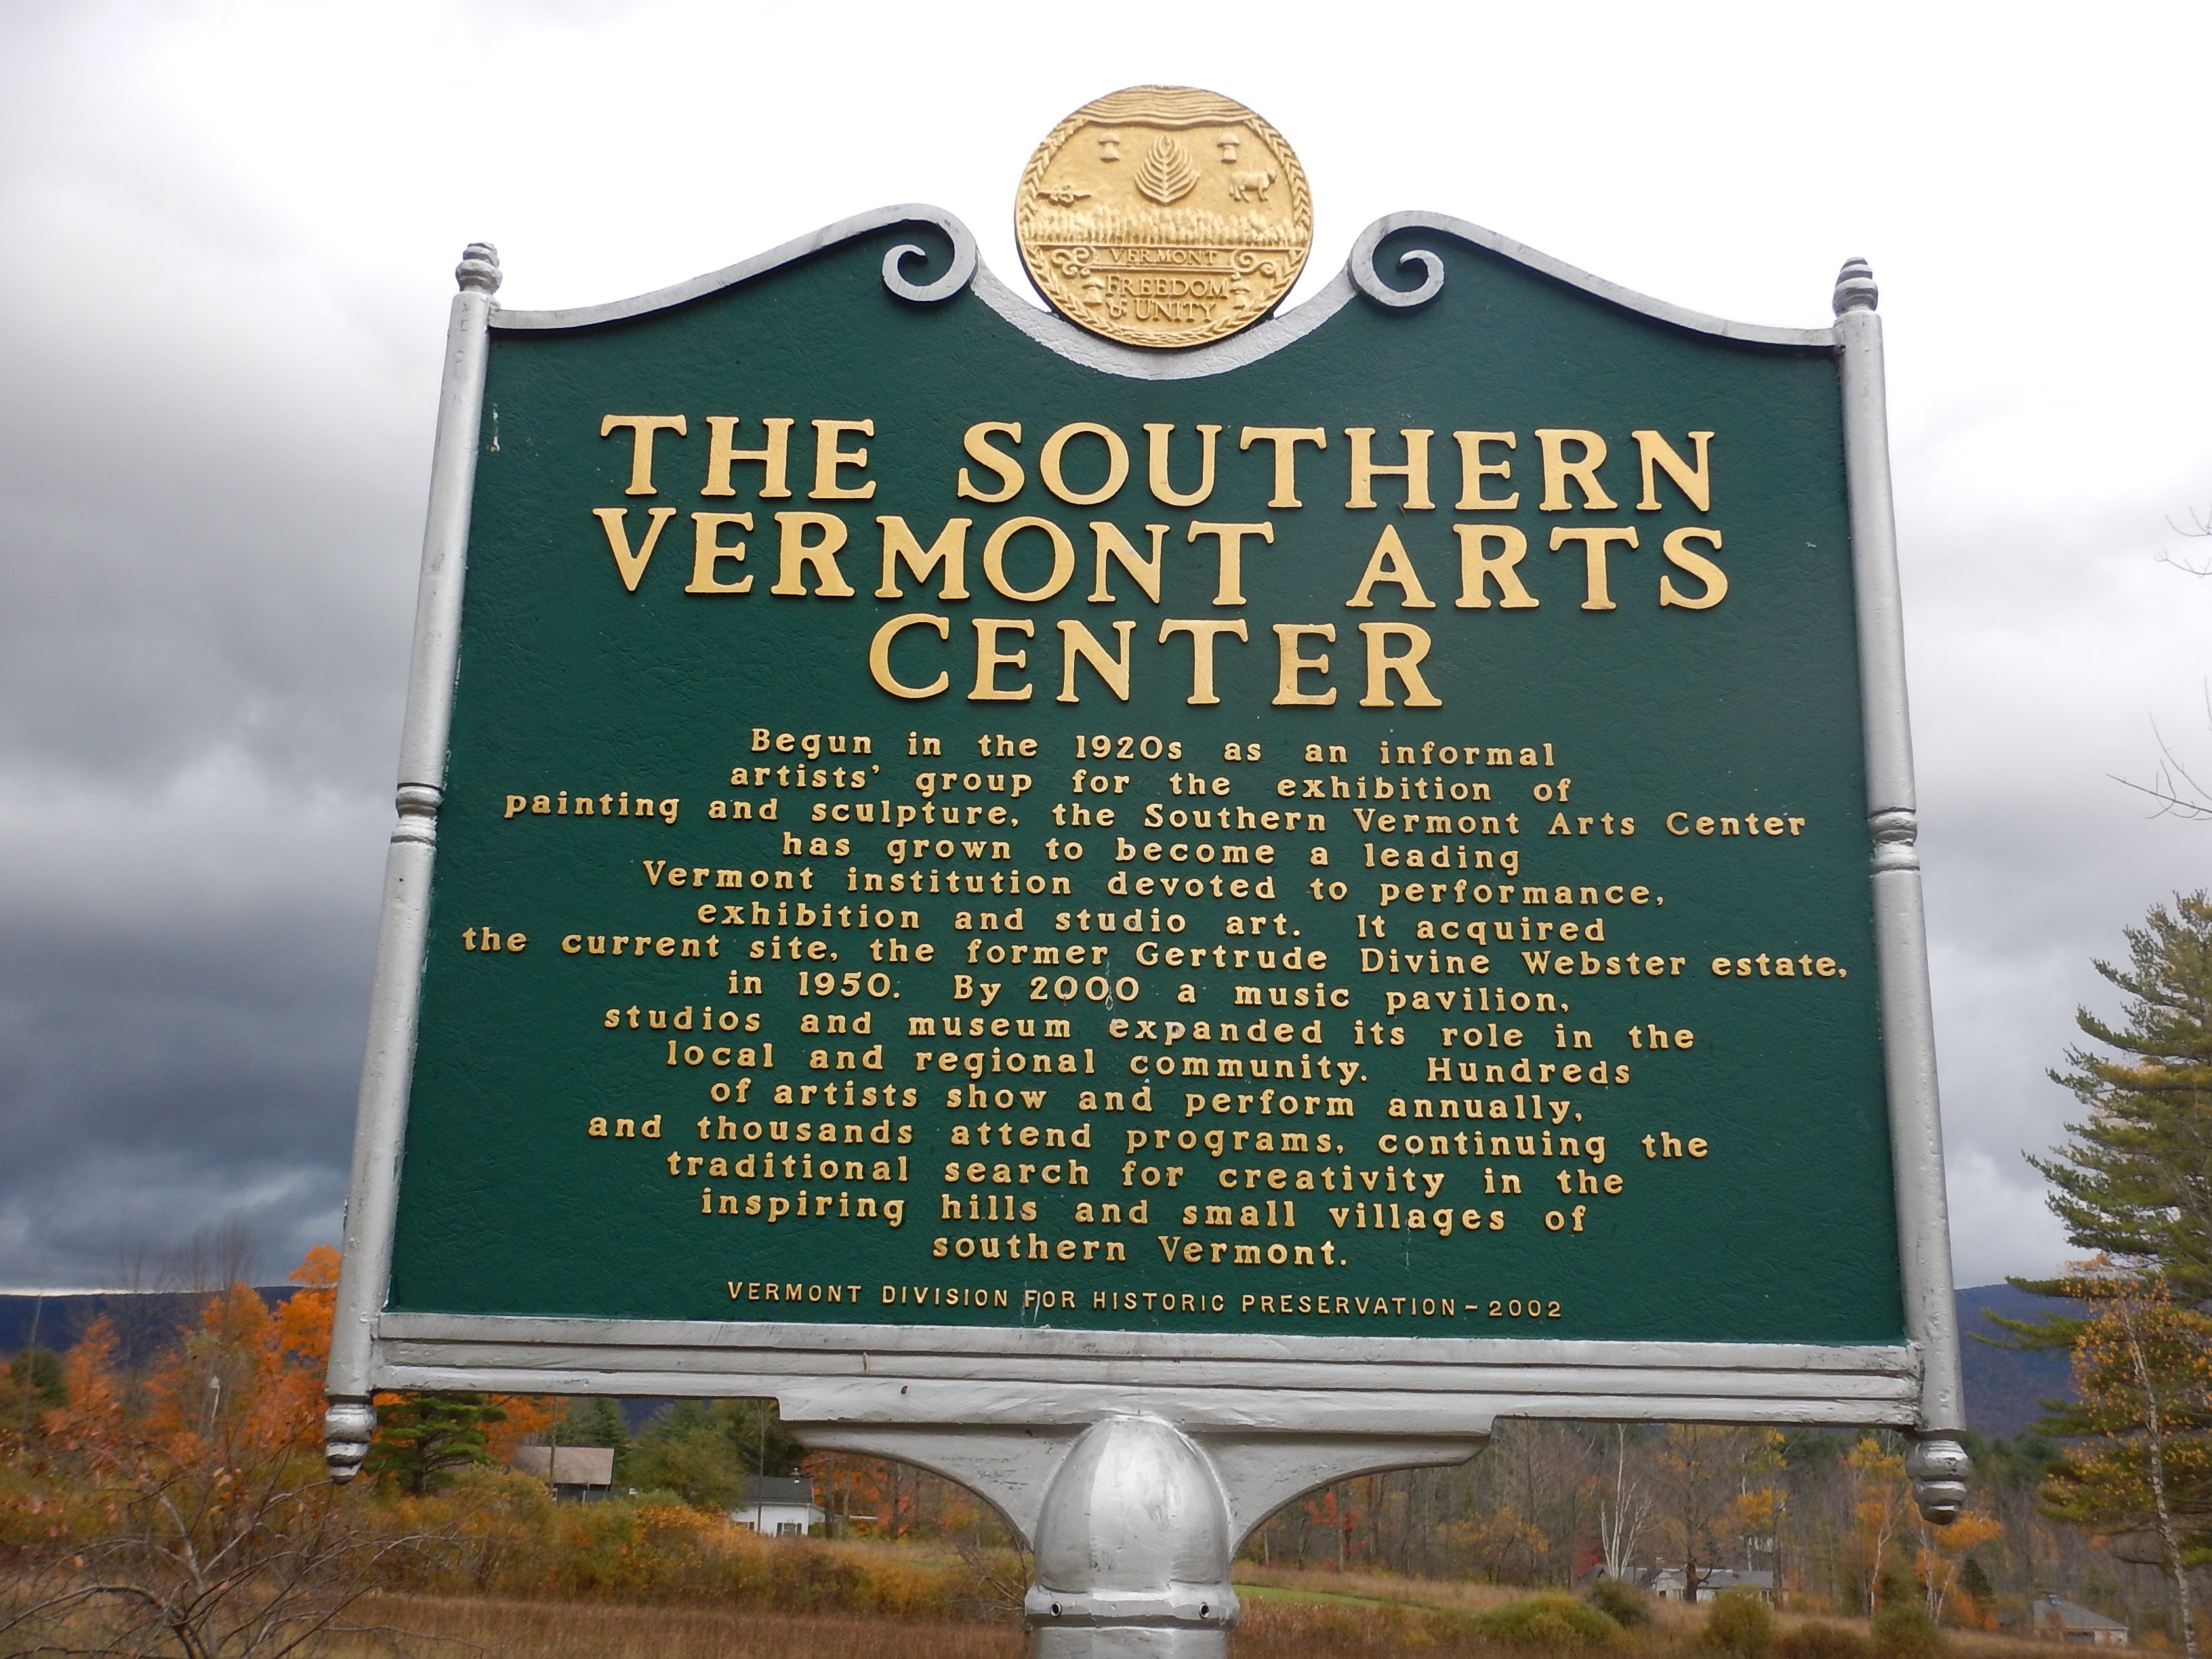 The Southern Vermont Arts Center Marker